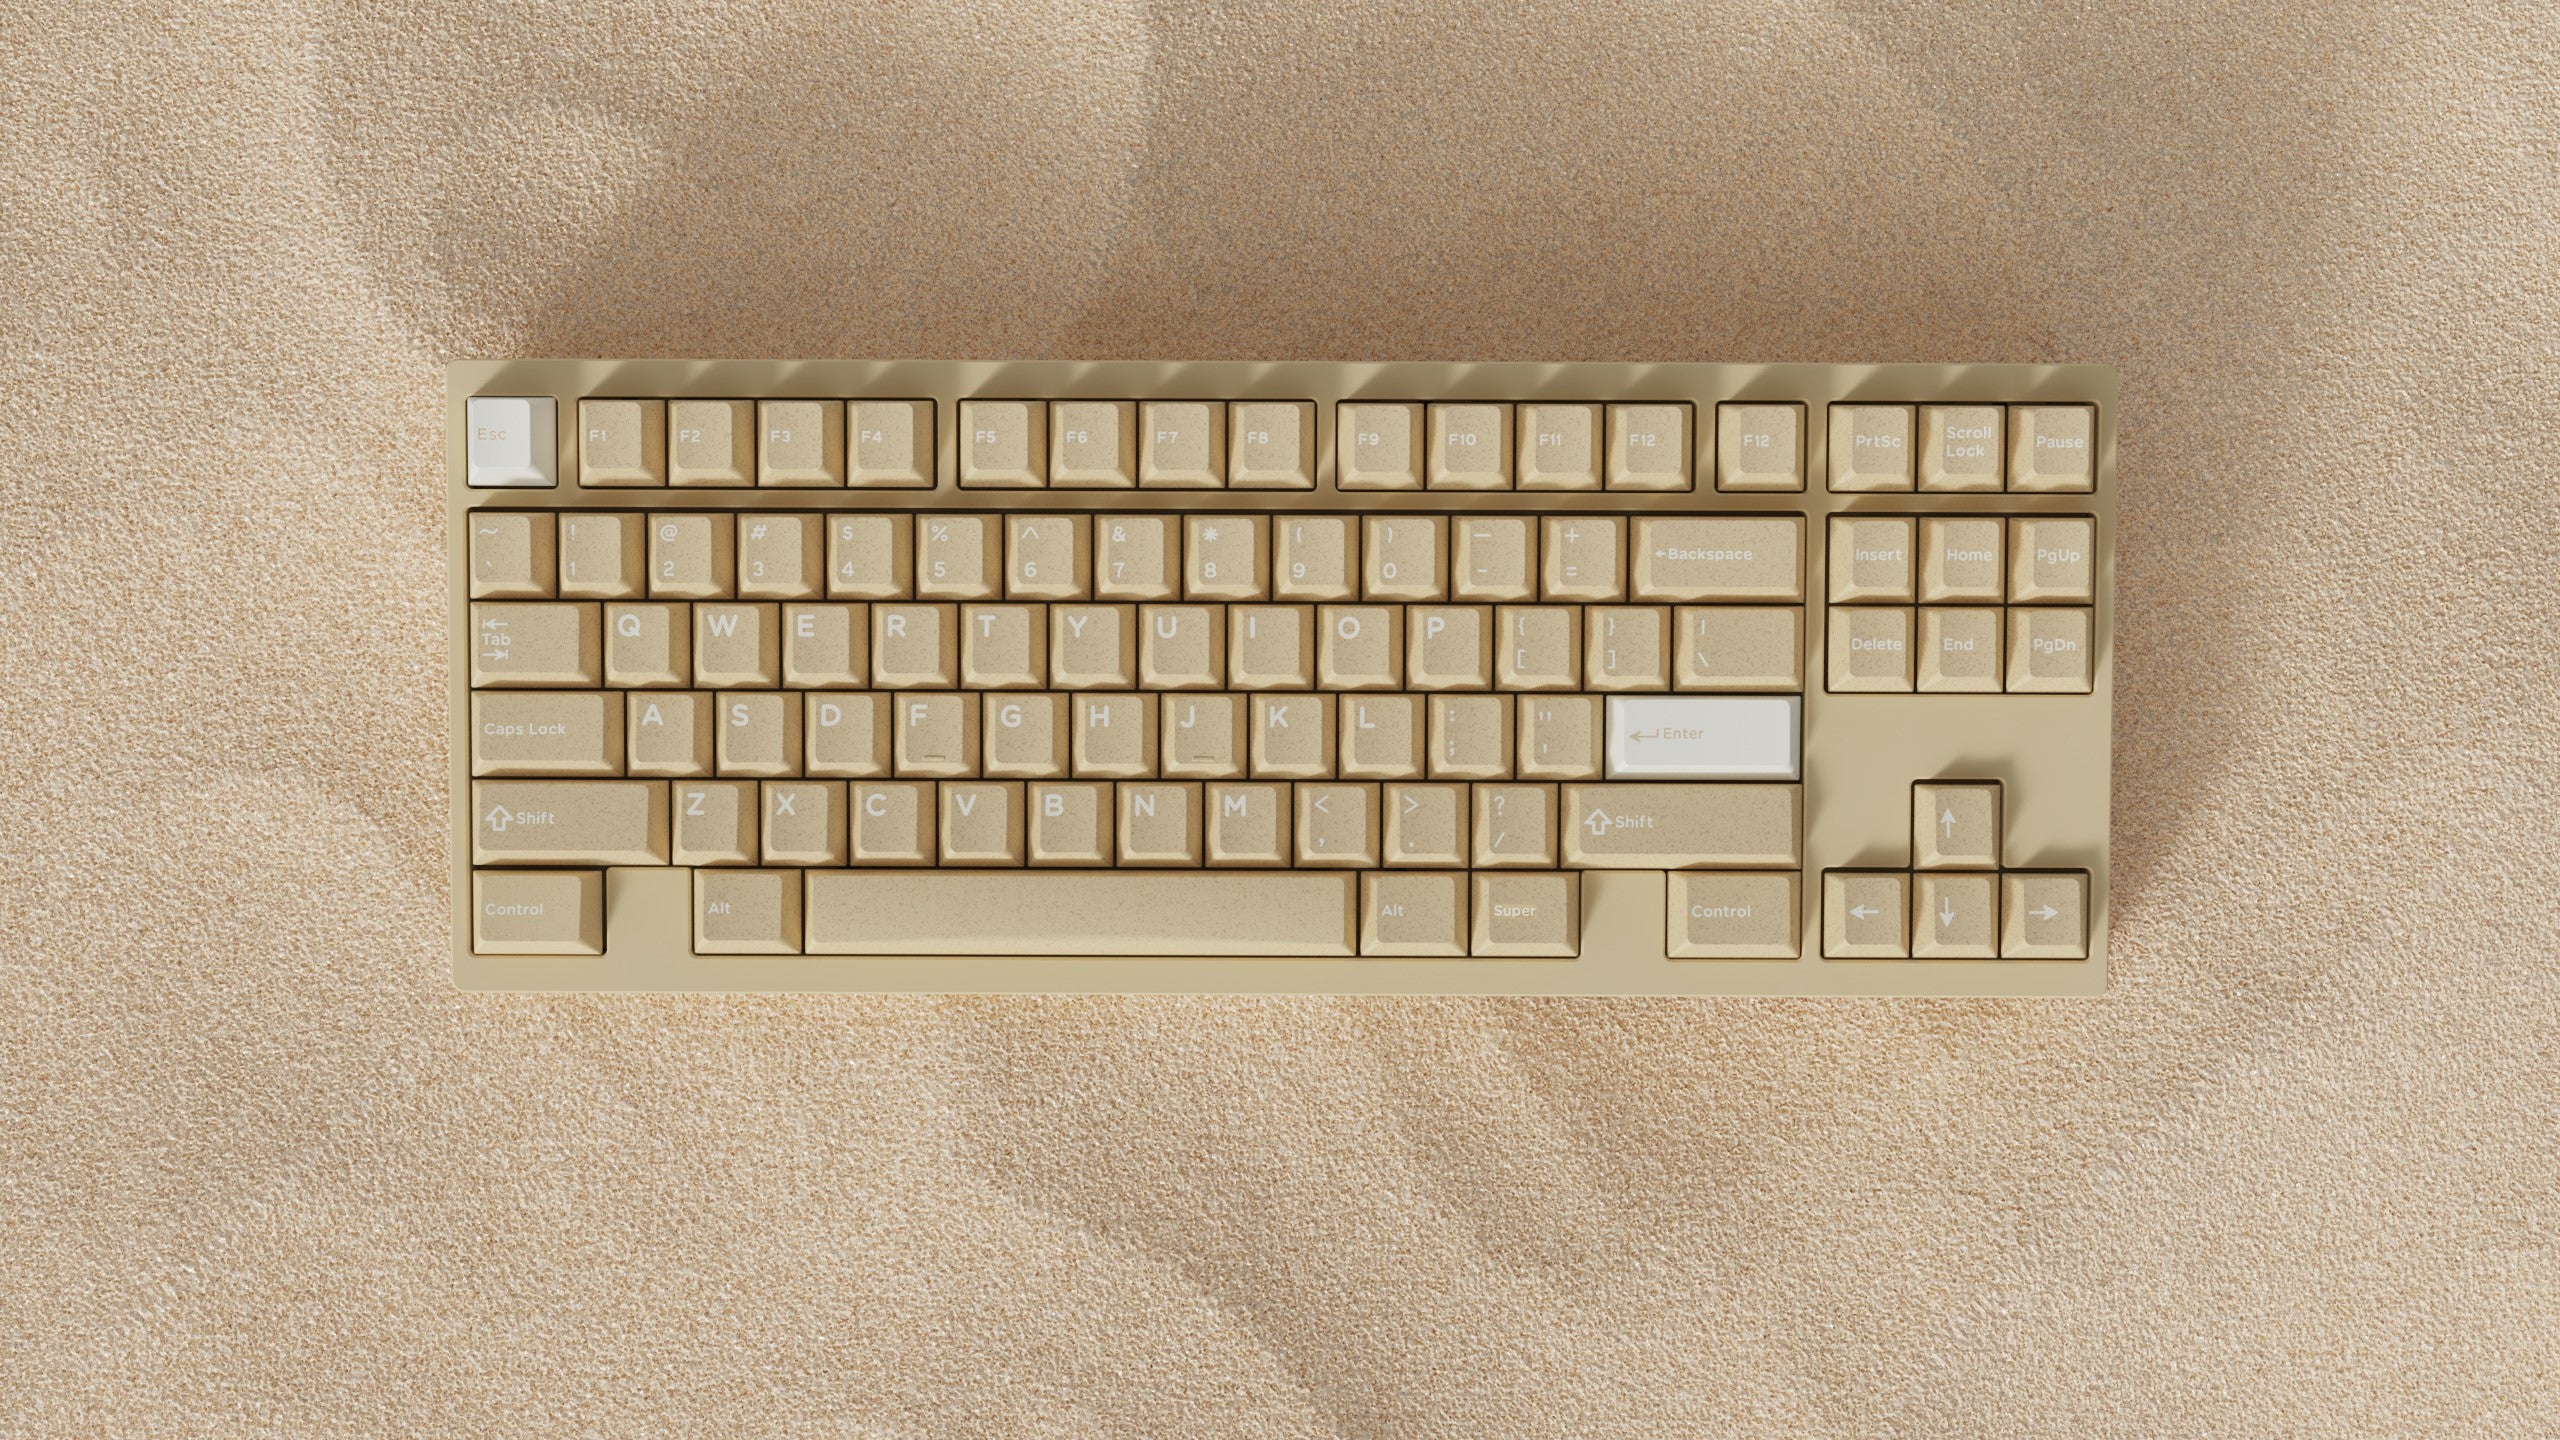 GMK CYL Dune Keycaps [Group Buy]